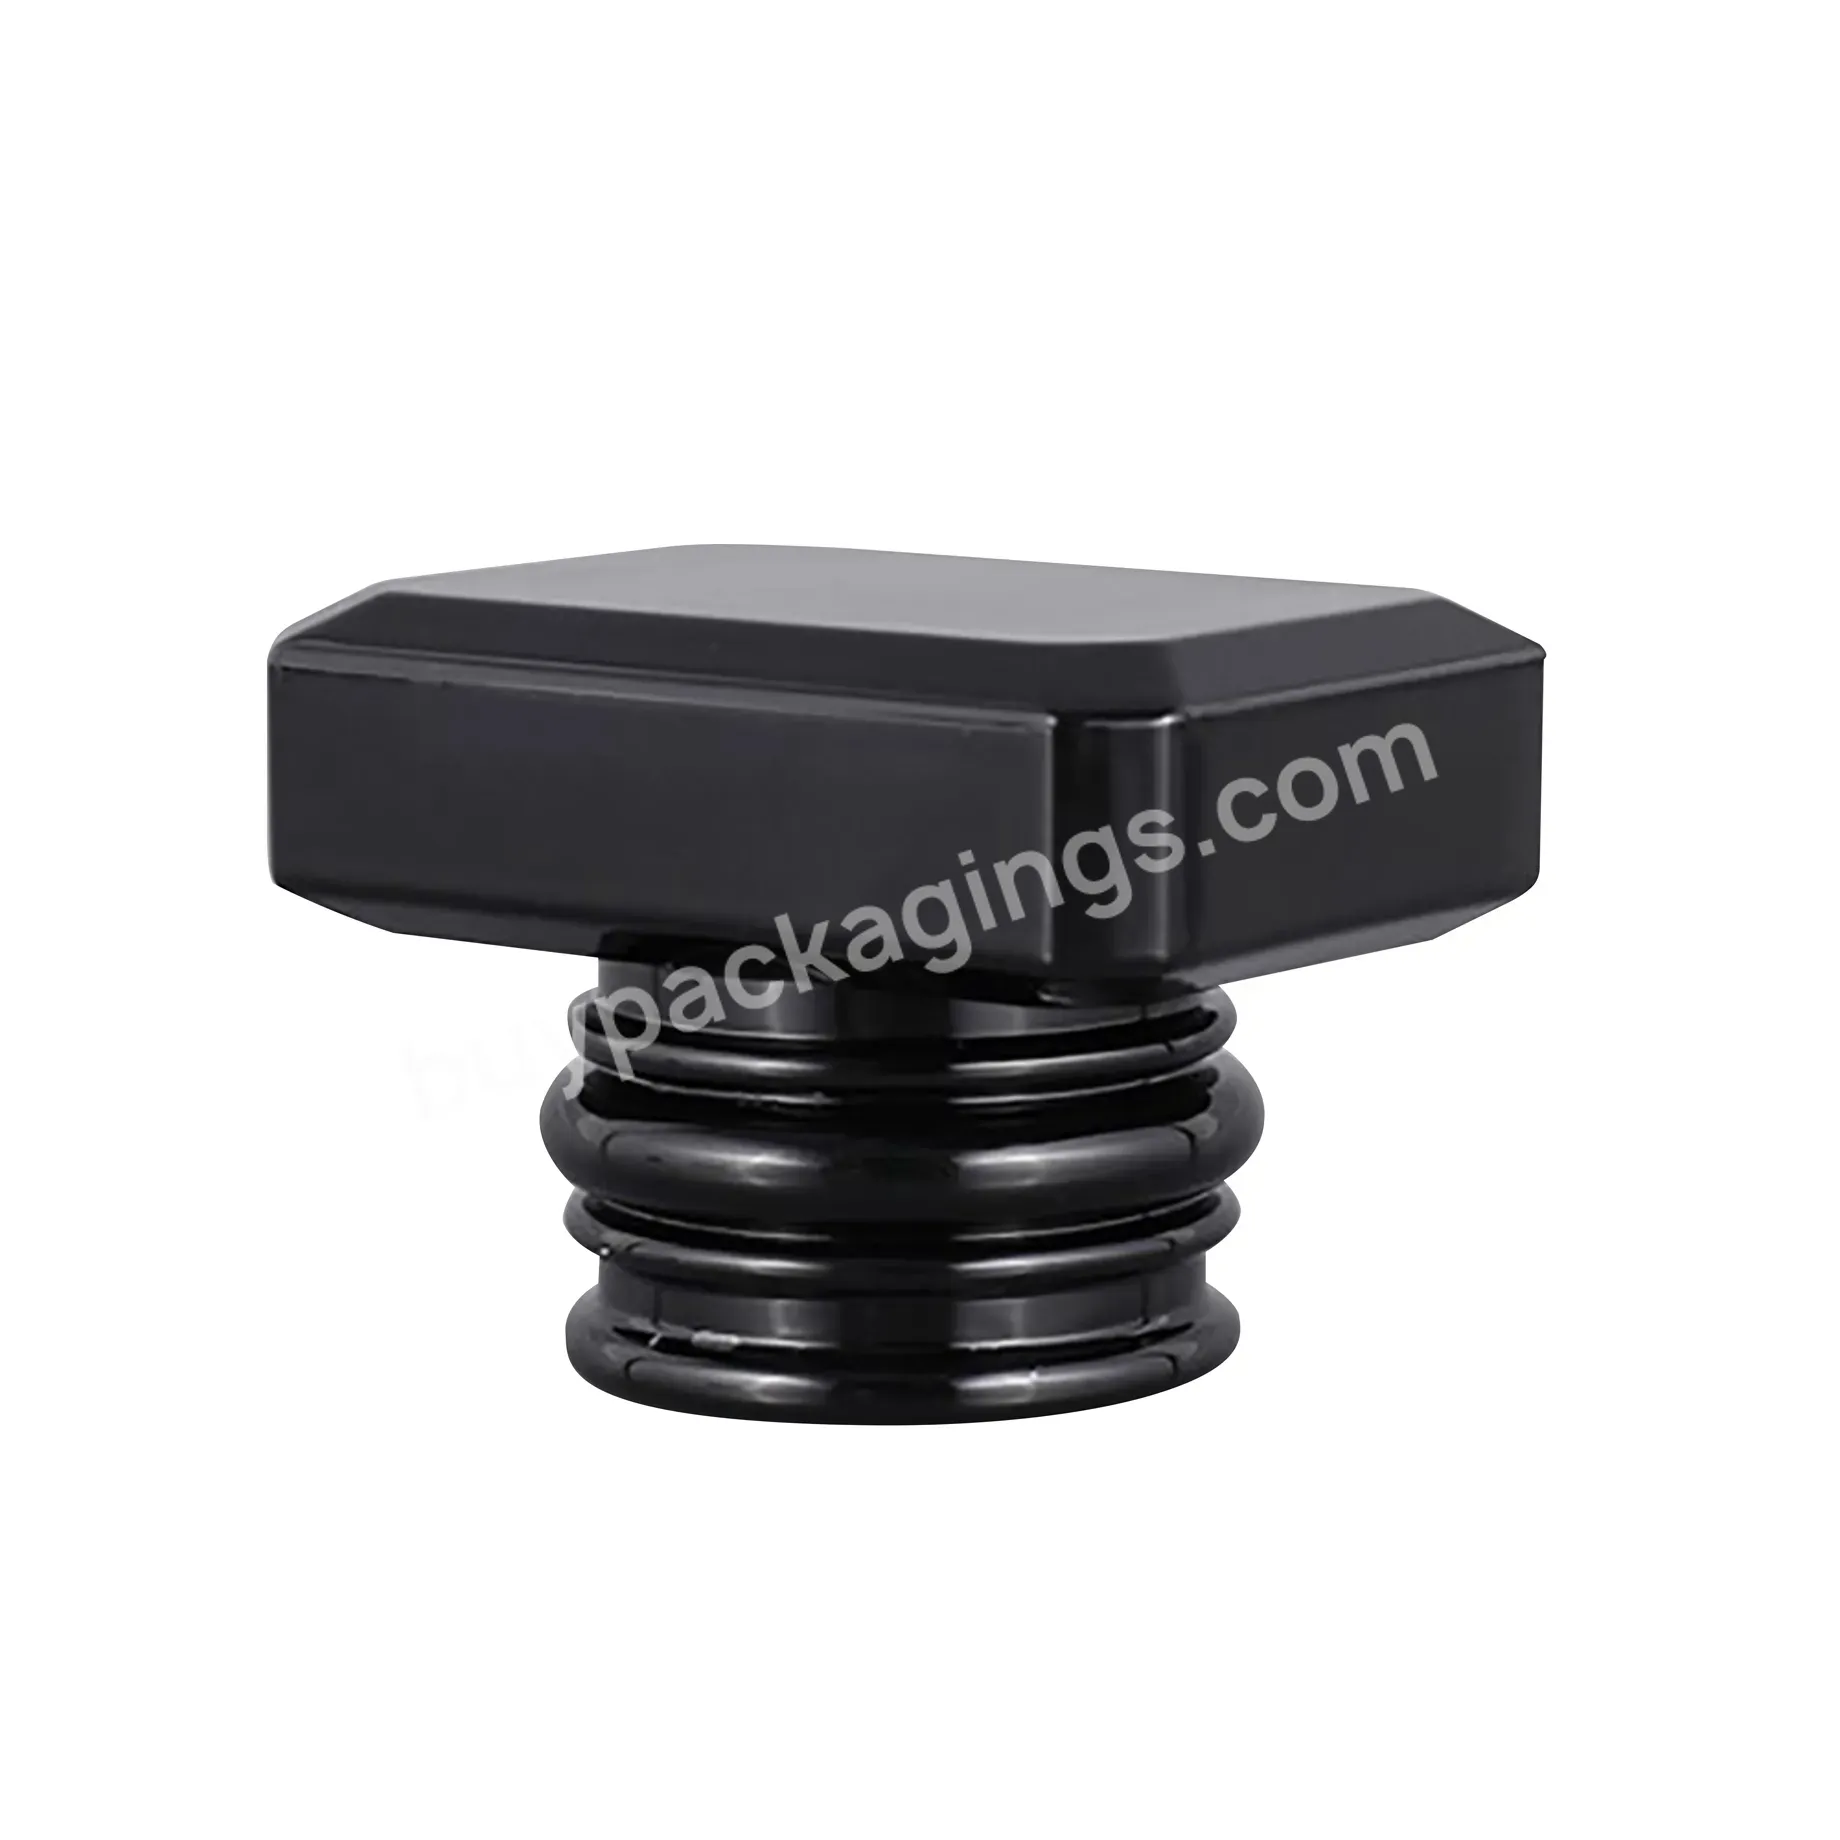 Fea15 Wholesale Plastic Abs Shiny Black Perfume Cap Striped Electroplated Square Perfume Cap For Glass Perfume Bottle - Buy Fea15 Wholesale Plastic Abs Shiny Black Perfume Cap,Striped Electroplated Square Perfume Cap,Cap For Glass Perfume Bottle.